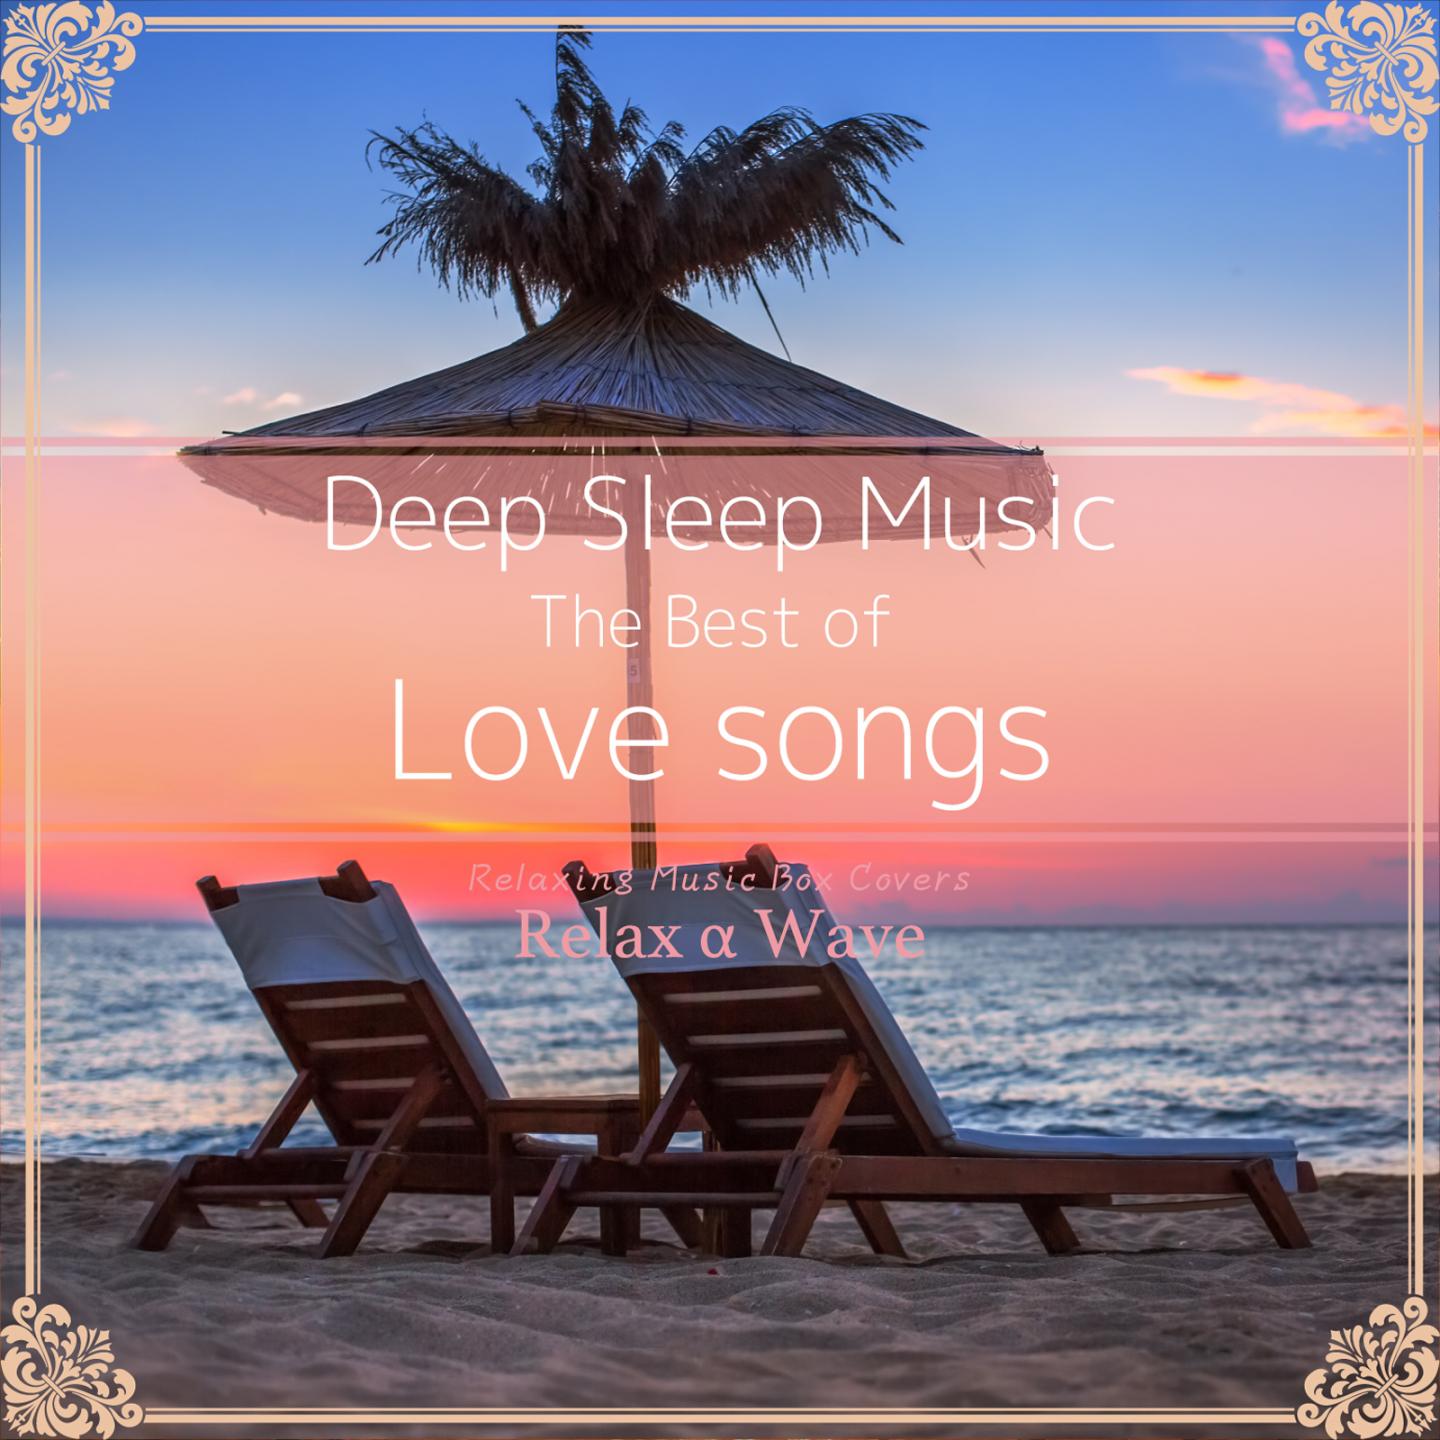 Deep Sleep Music - The Best of Love Songs: Relaxing Music Box Covers